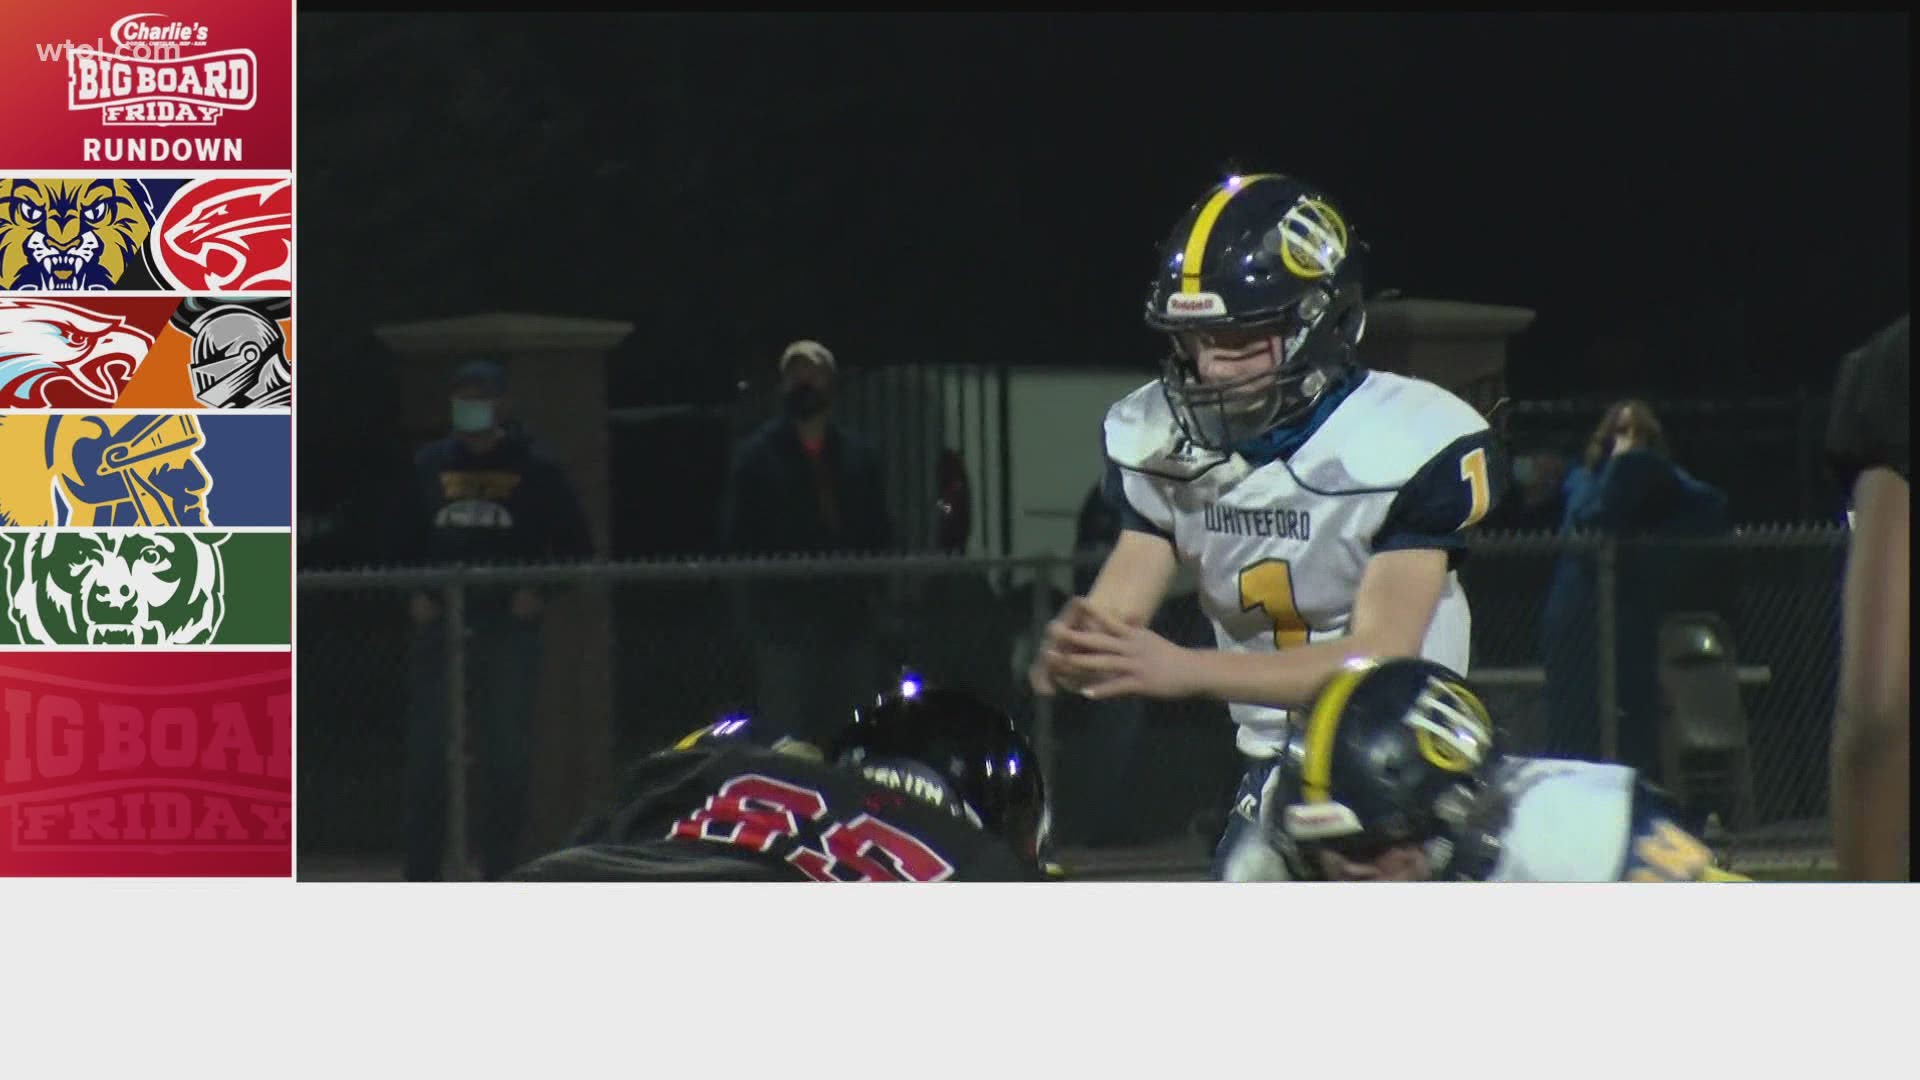 WTOL 11 Sports Director Jordan Strack brings the highlights from week 2 of the 2020-21 Michigan high school football playoffs from Charlie's Dodge Chrysler Jeep Ram.